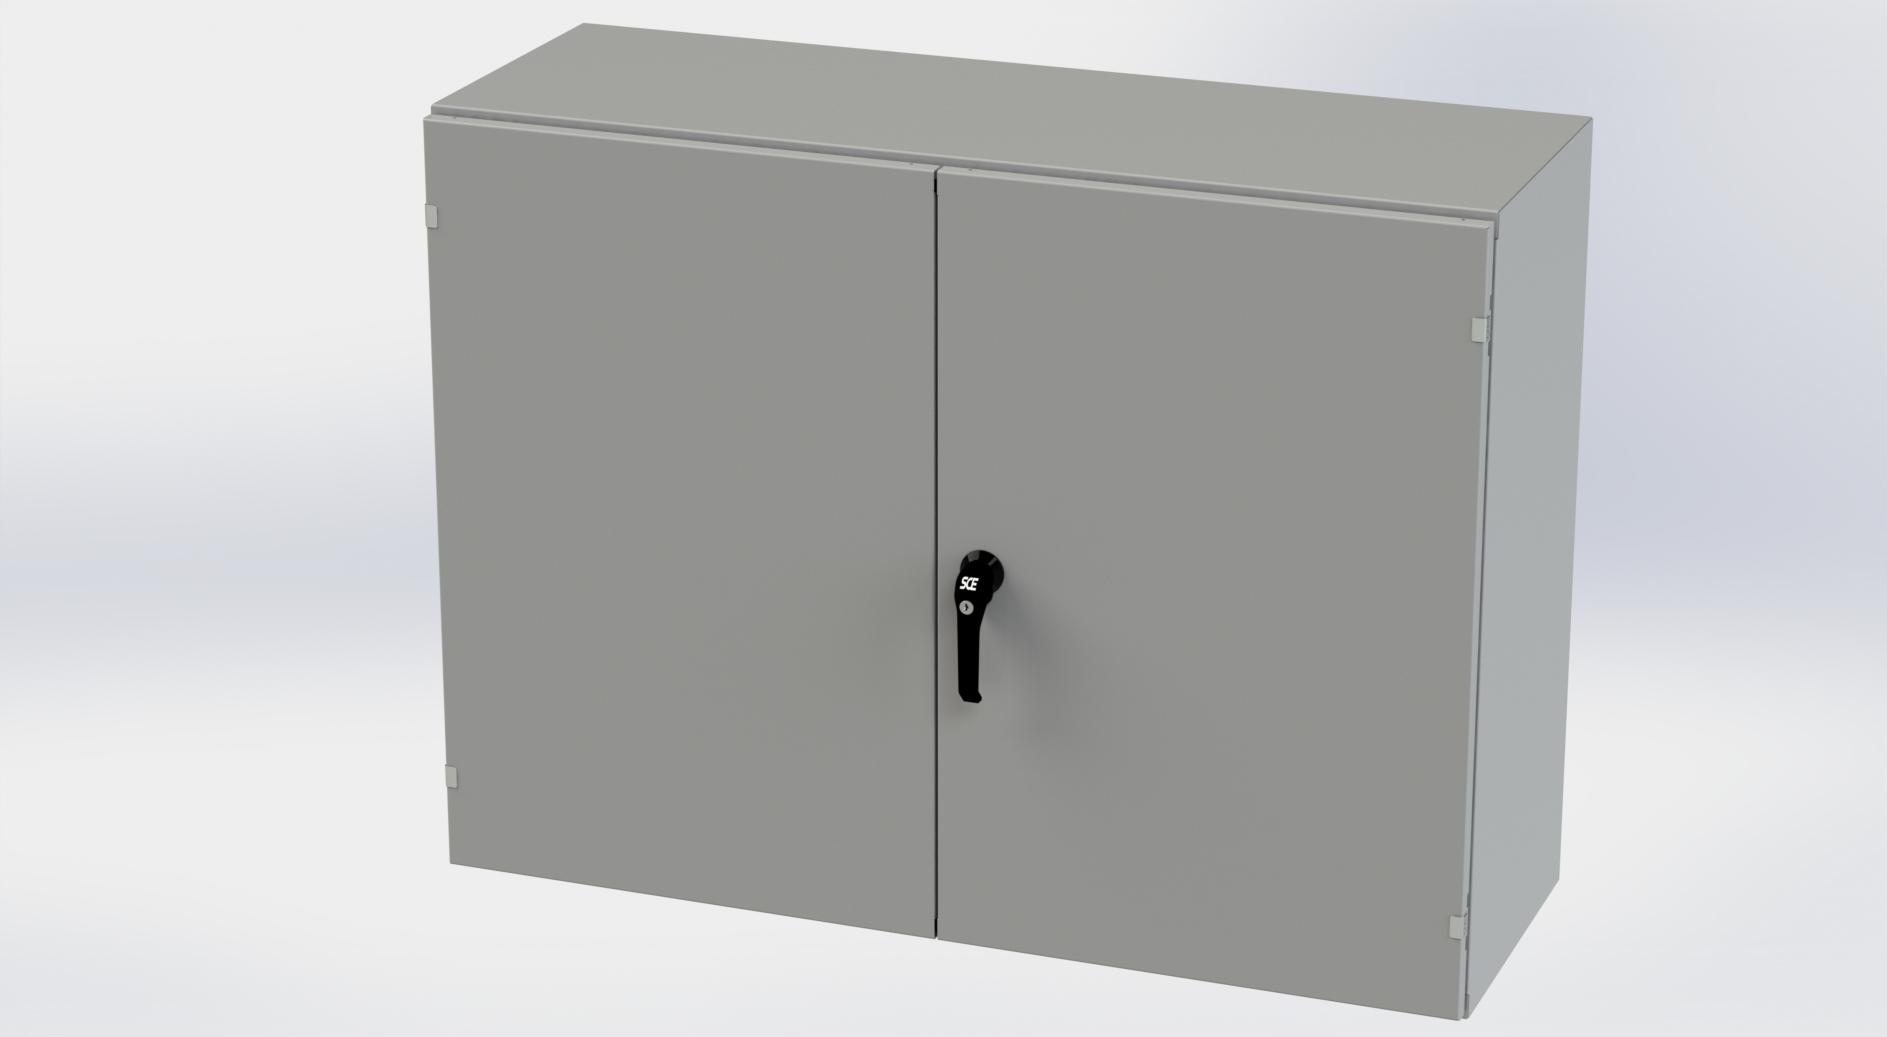 Saginaw Control SCE-364816WFLP WFLP Enclosure, Height:36.00", Width:48.00", Depth:16.00", ANSI-61 gray powder coating inside and out.